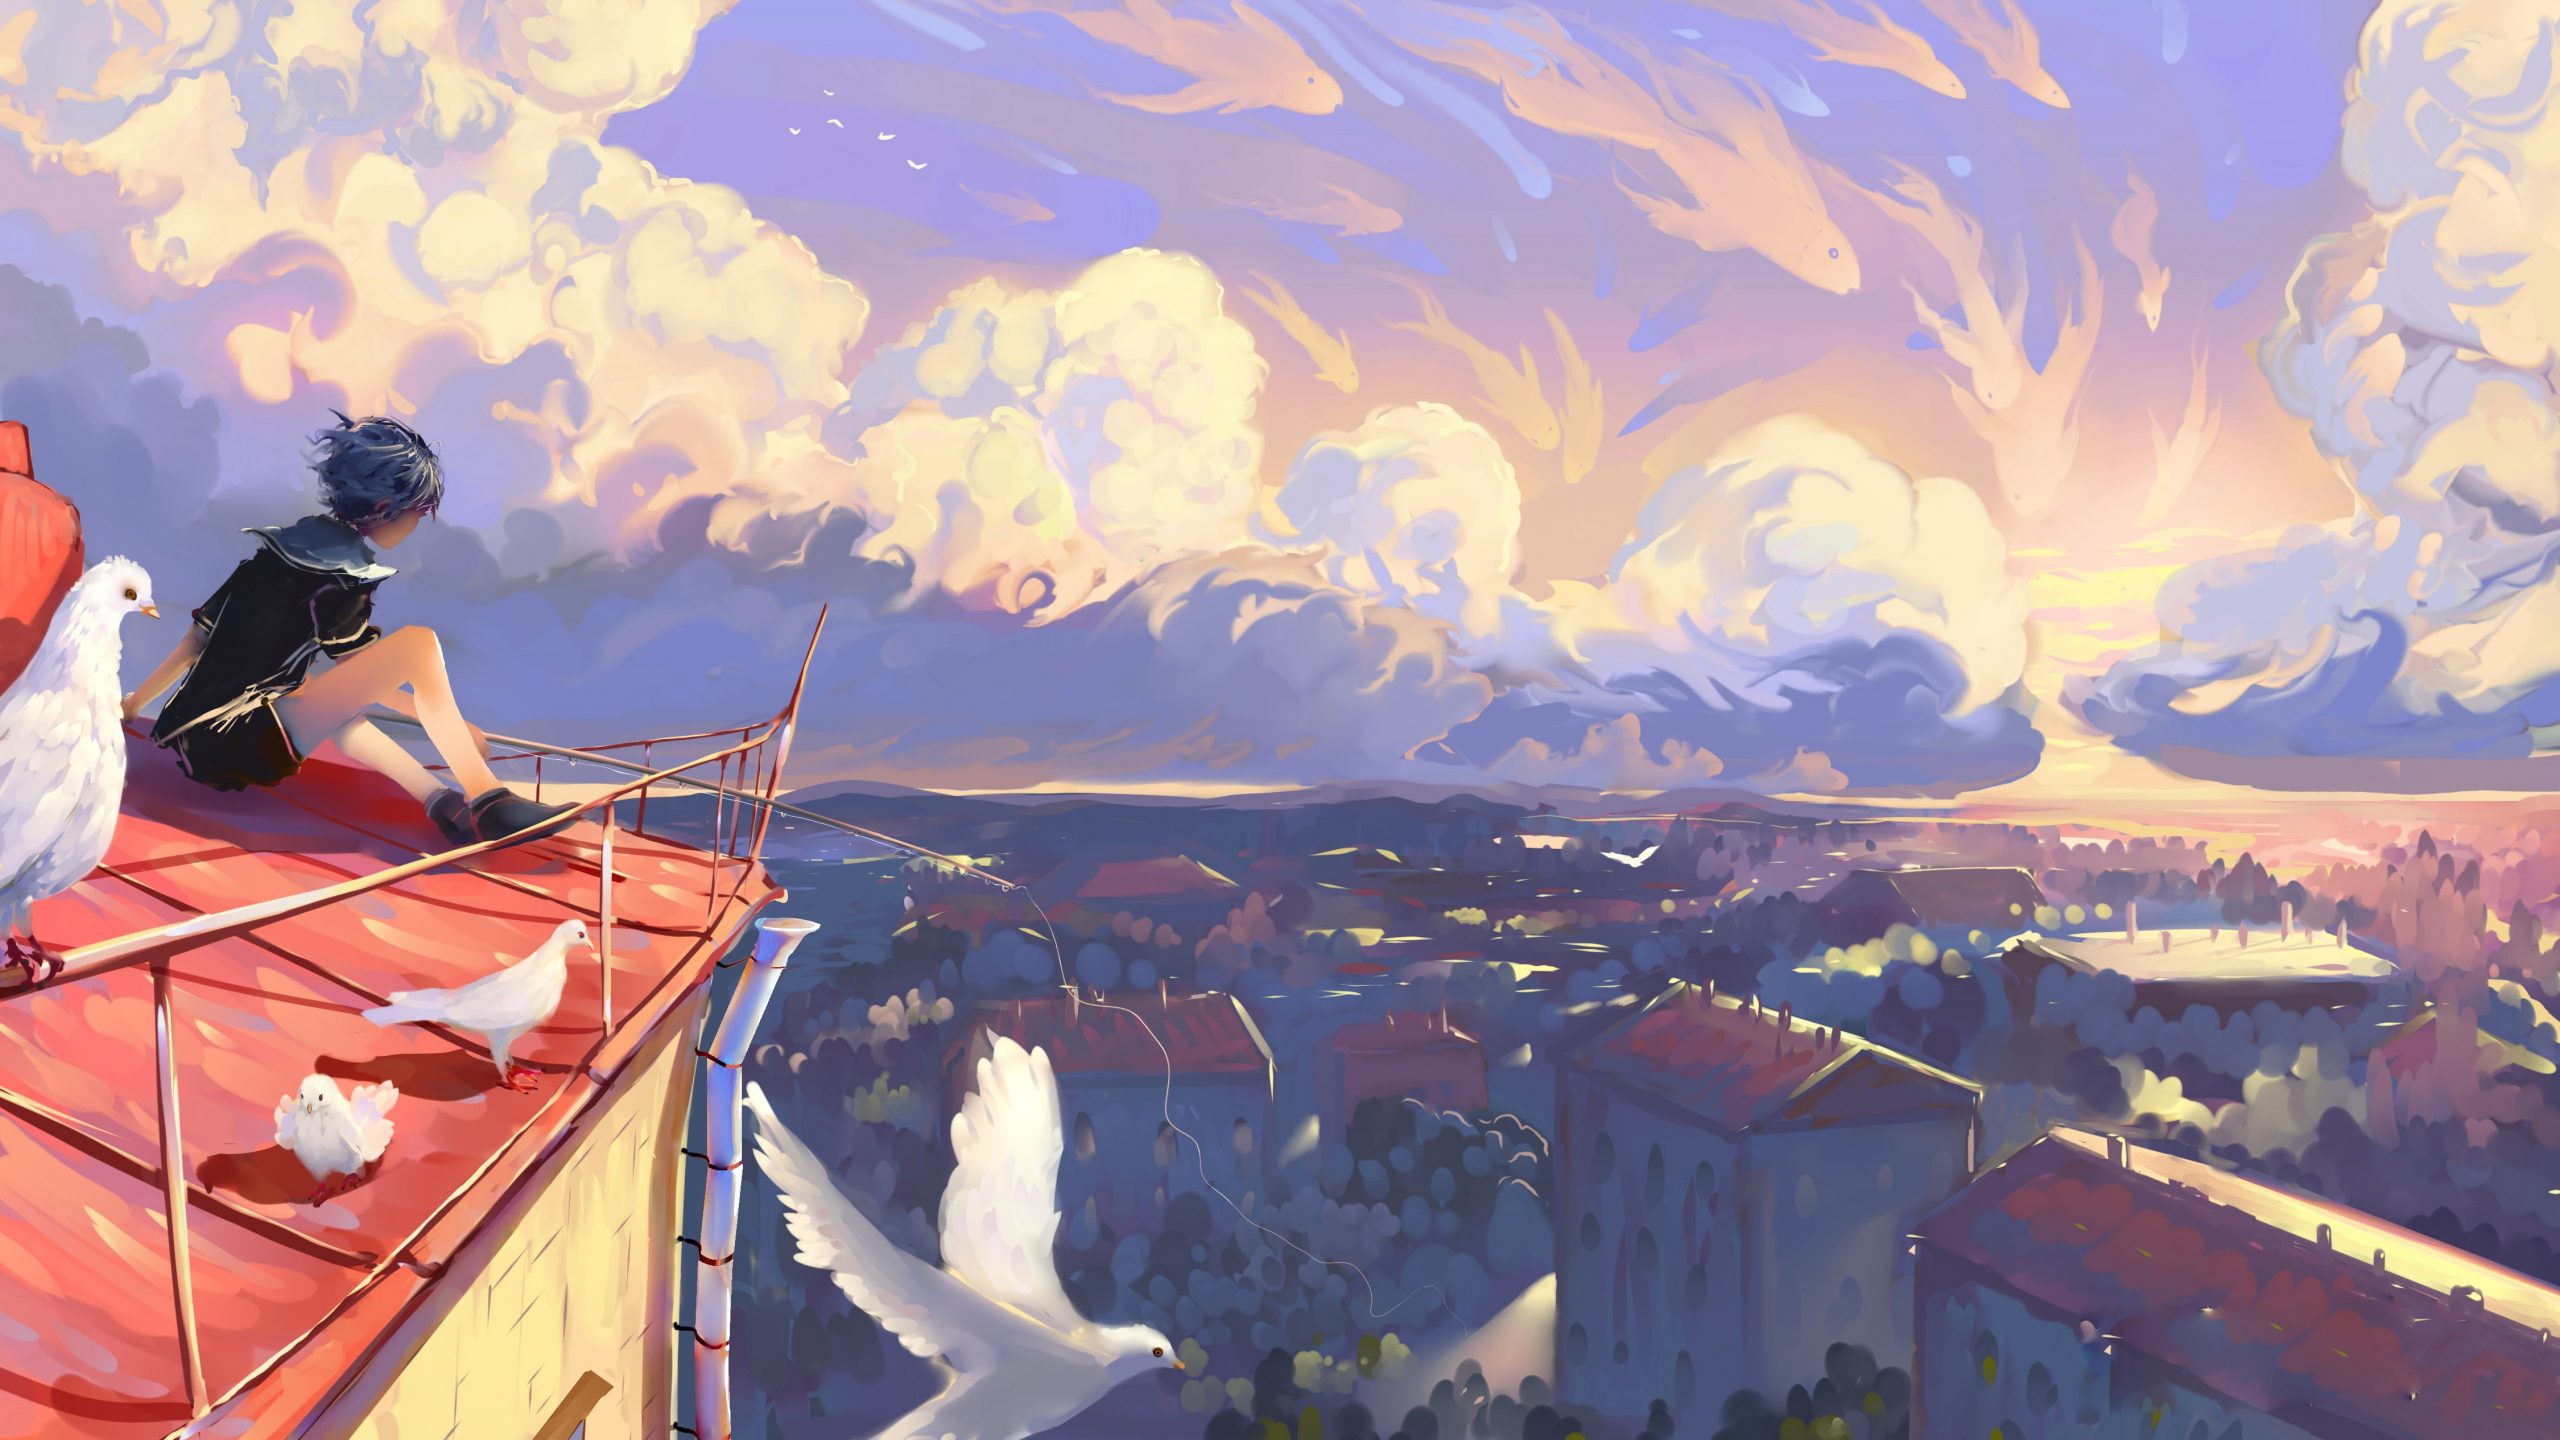 Man on top of the roof painting, artwork, illustration, sunset